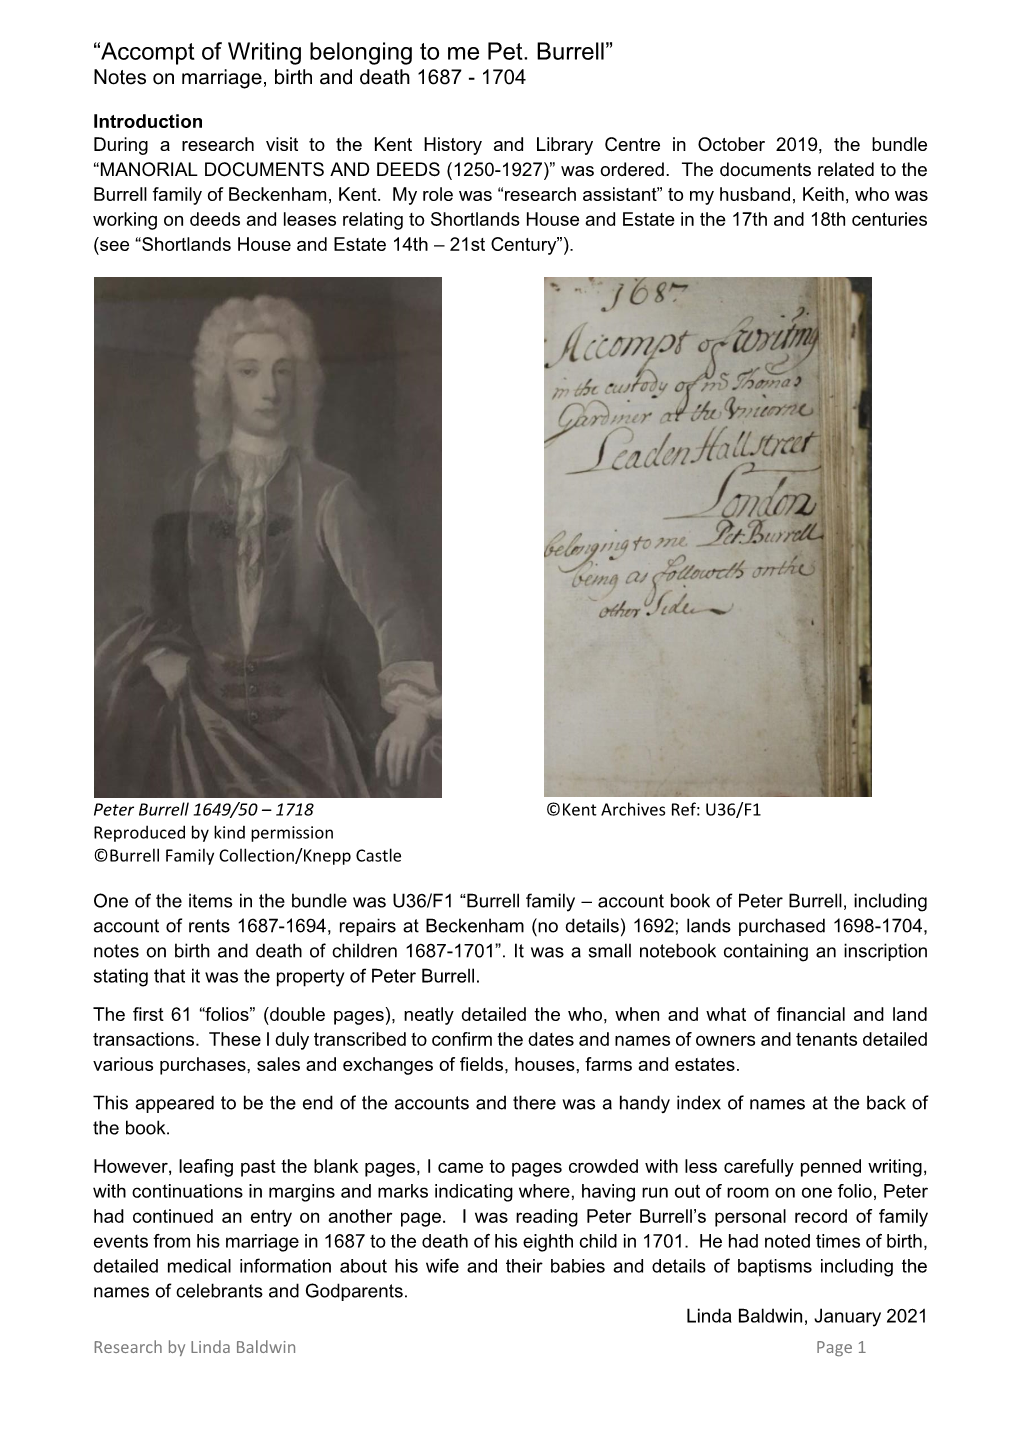 “Accompt of Writing Belonging to Me Pet. Burrell” Notes on Marriage, Birth and Death 1687 - 1704